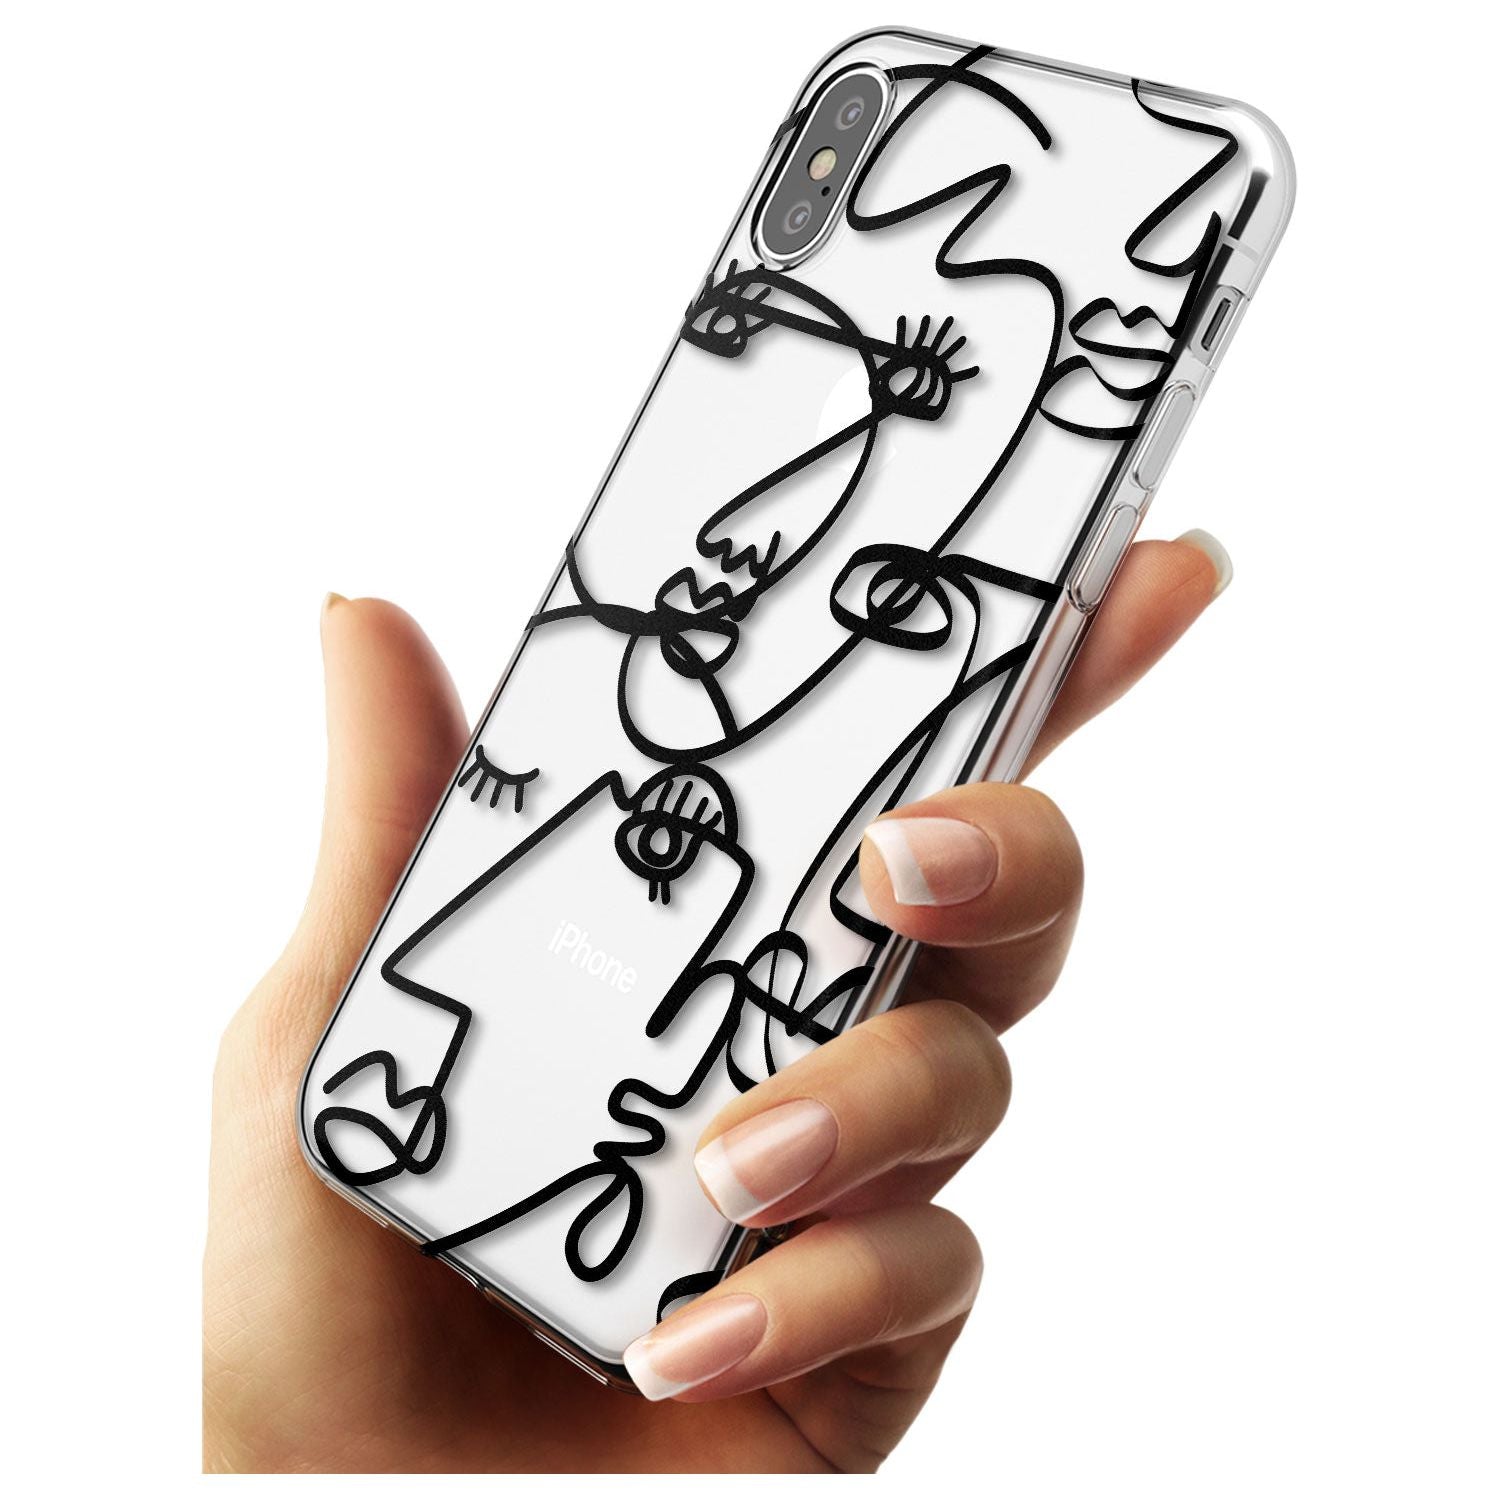 Continuous Line Faces: Black on Clear Black Impact Phone Case for iPhone X XS Max XR